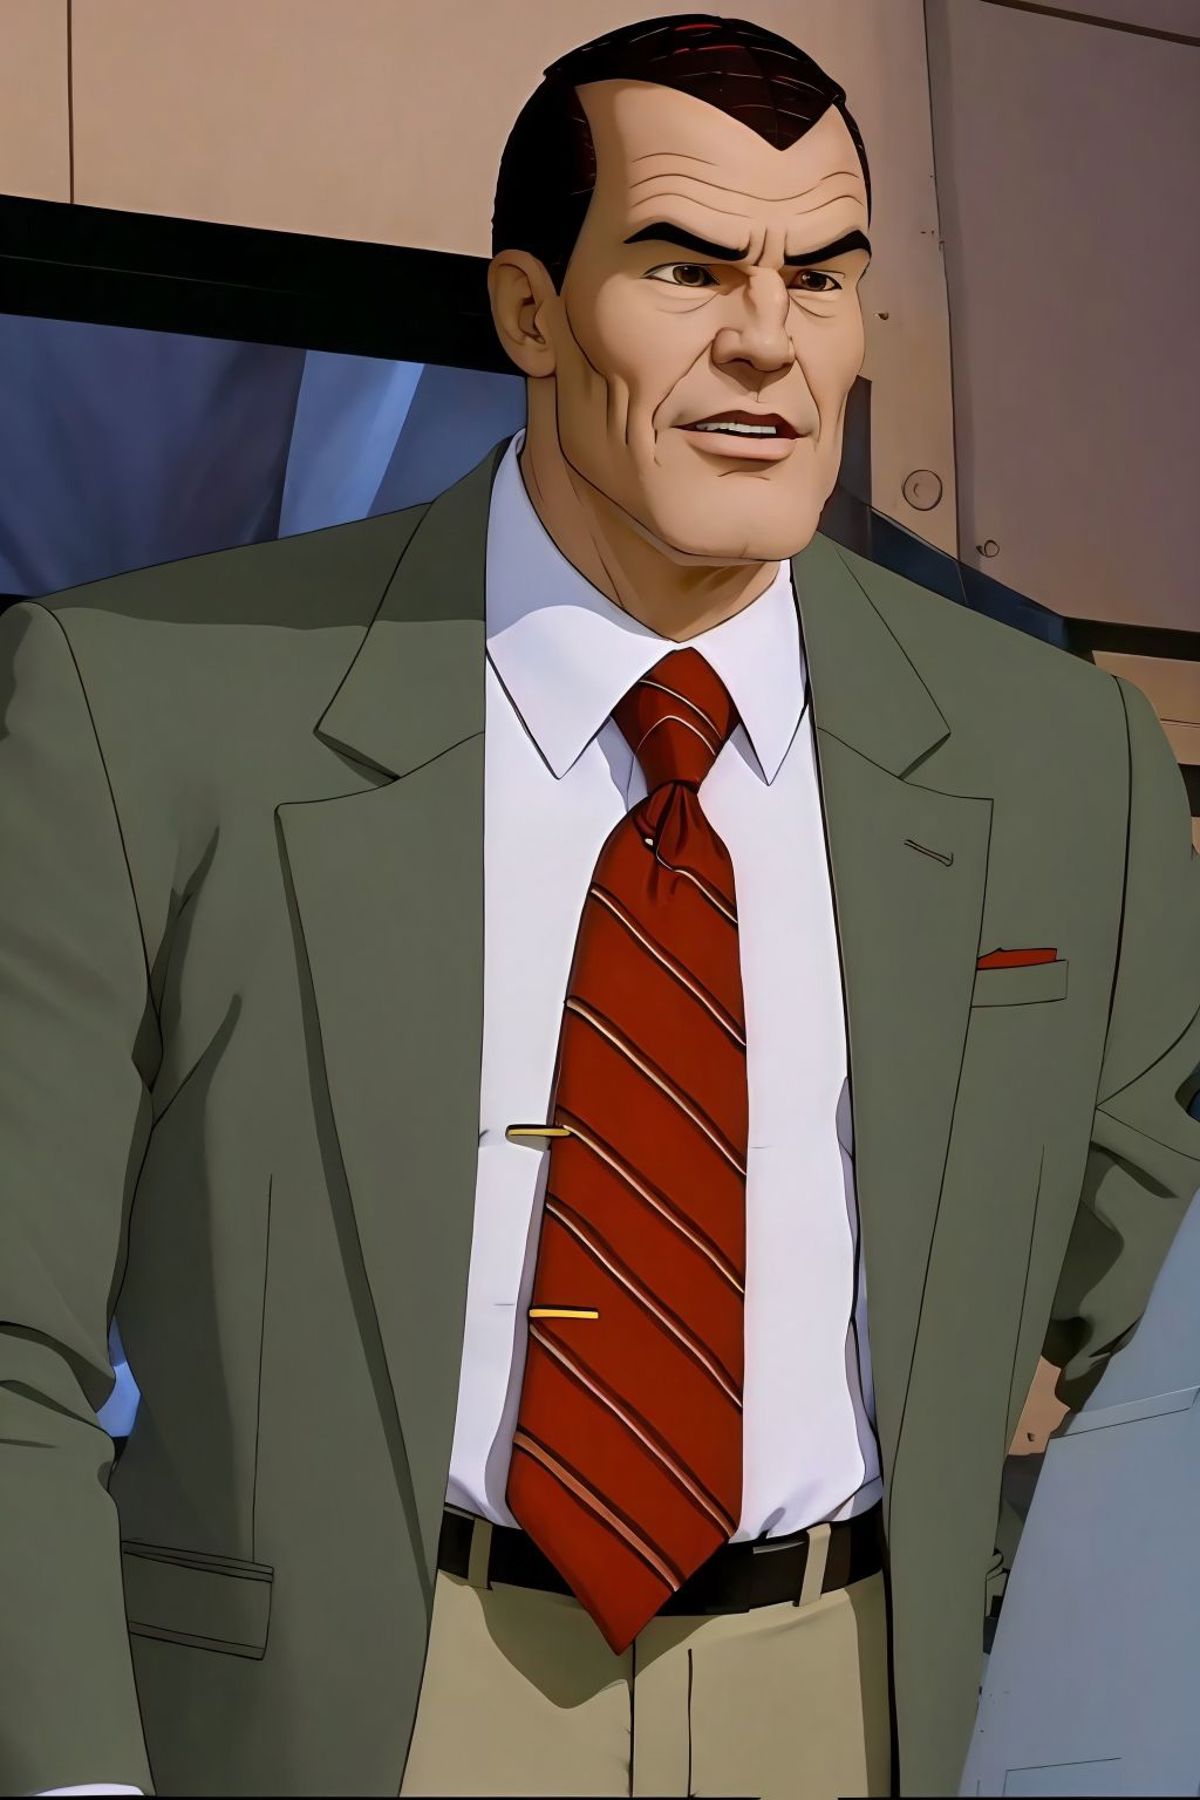 Norman Osborn (Spider-Man: The Animated Series) image by Montitto